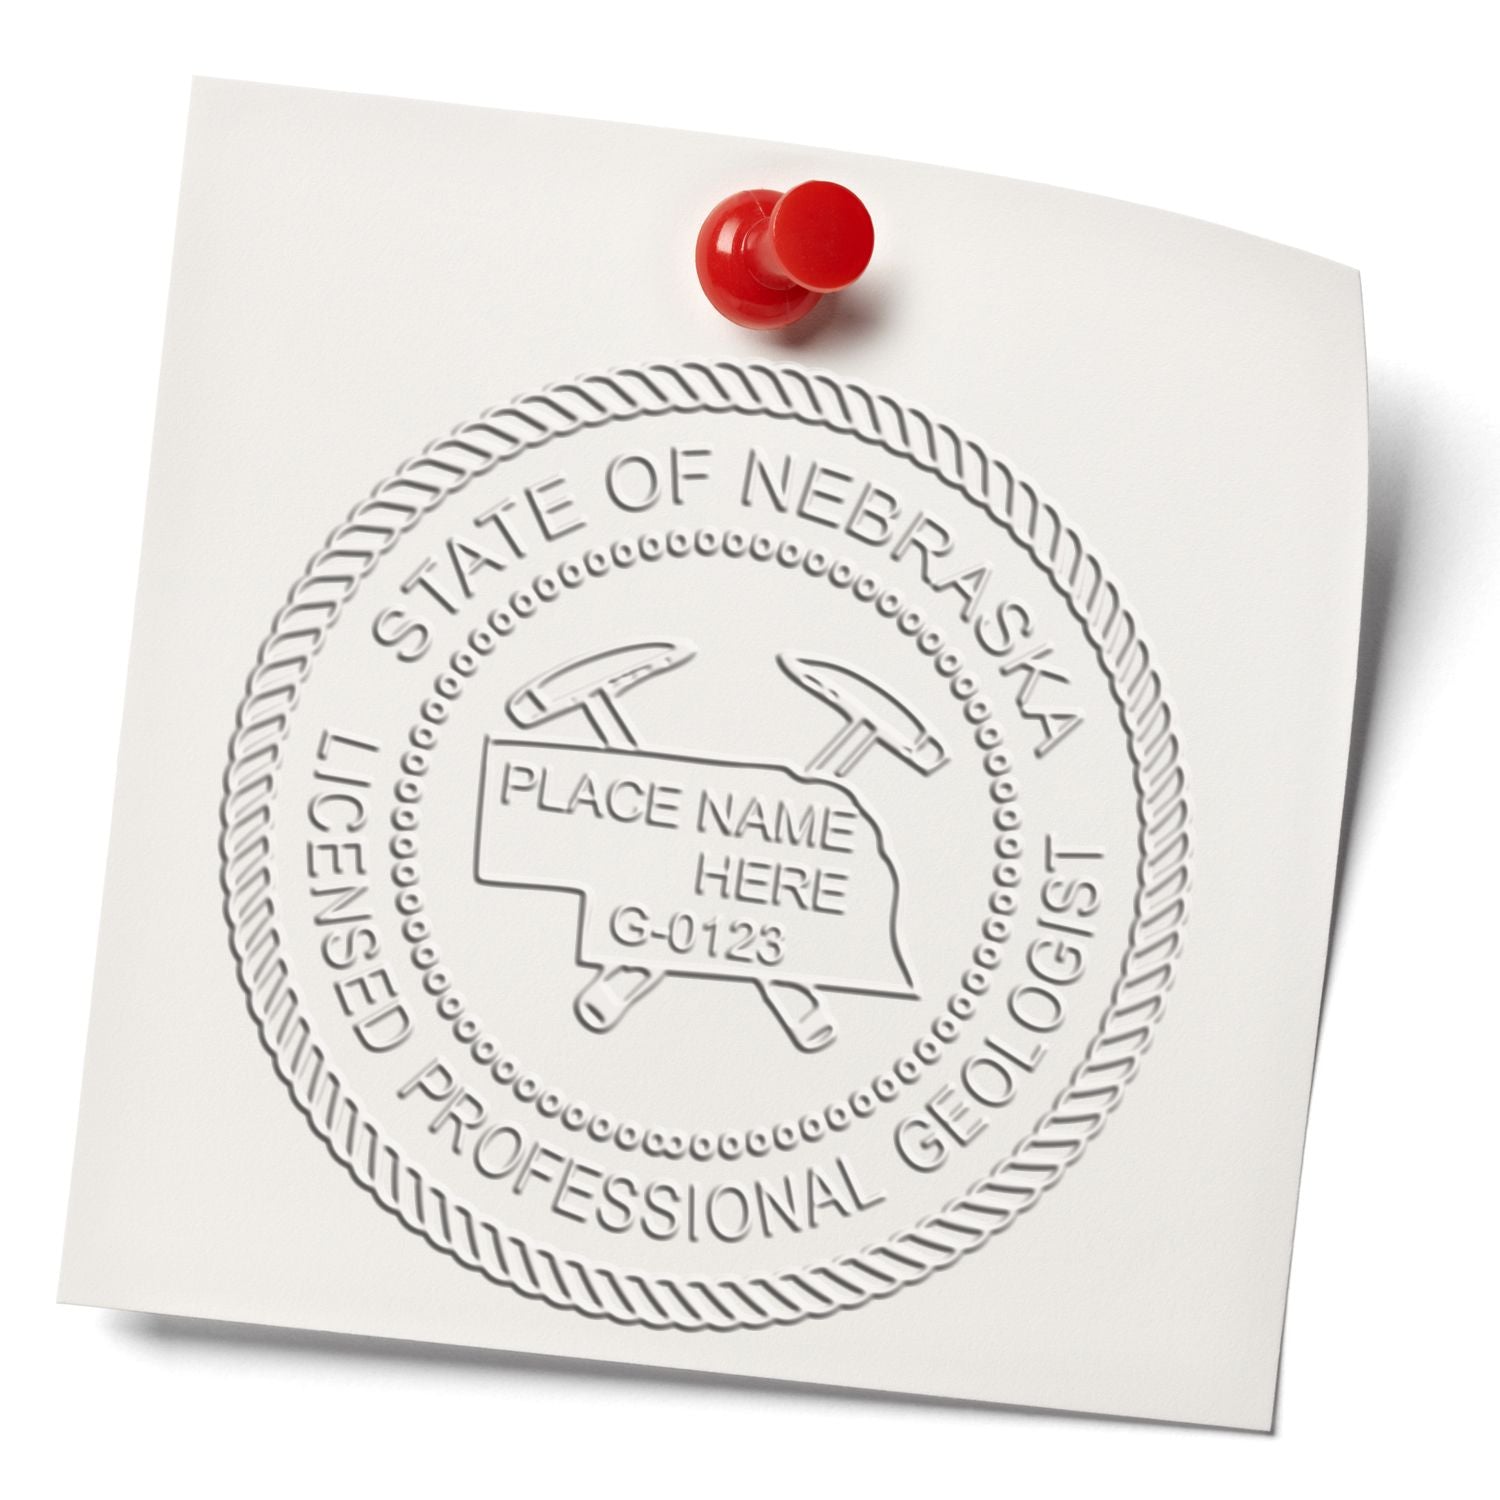 The main image for the Heavy Duty Cast Iron Nebraska Geologist Seal Embosser depicting a sample of the imprint and imprint sample